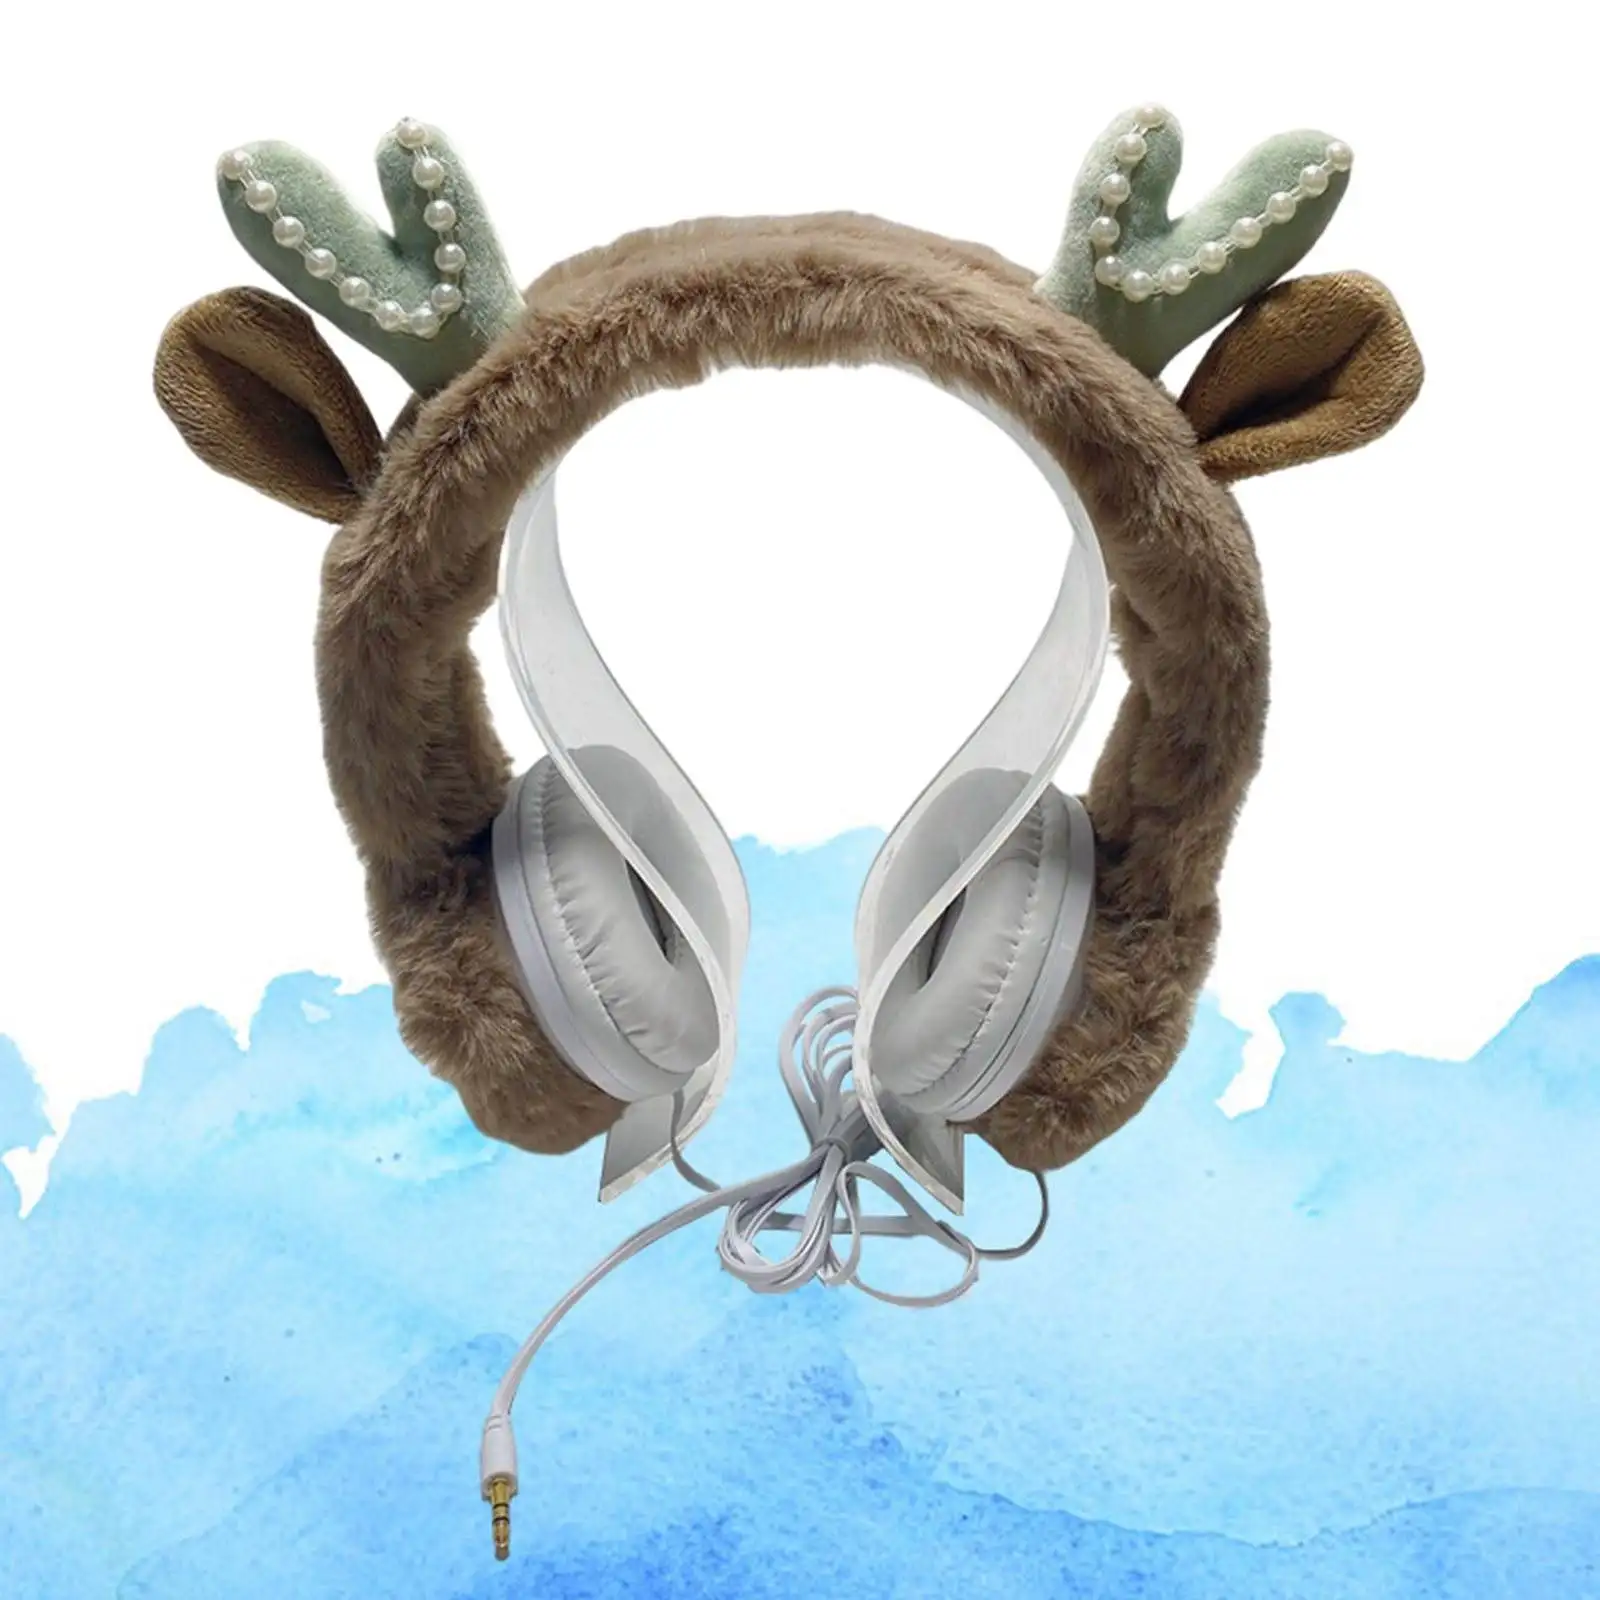 Wired Plush Antlers Headset Adjustable with Microphone HiFi Earphones for Laptop Gaming Smartphones Kids Adults for PS5